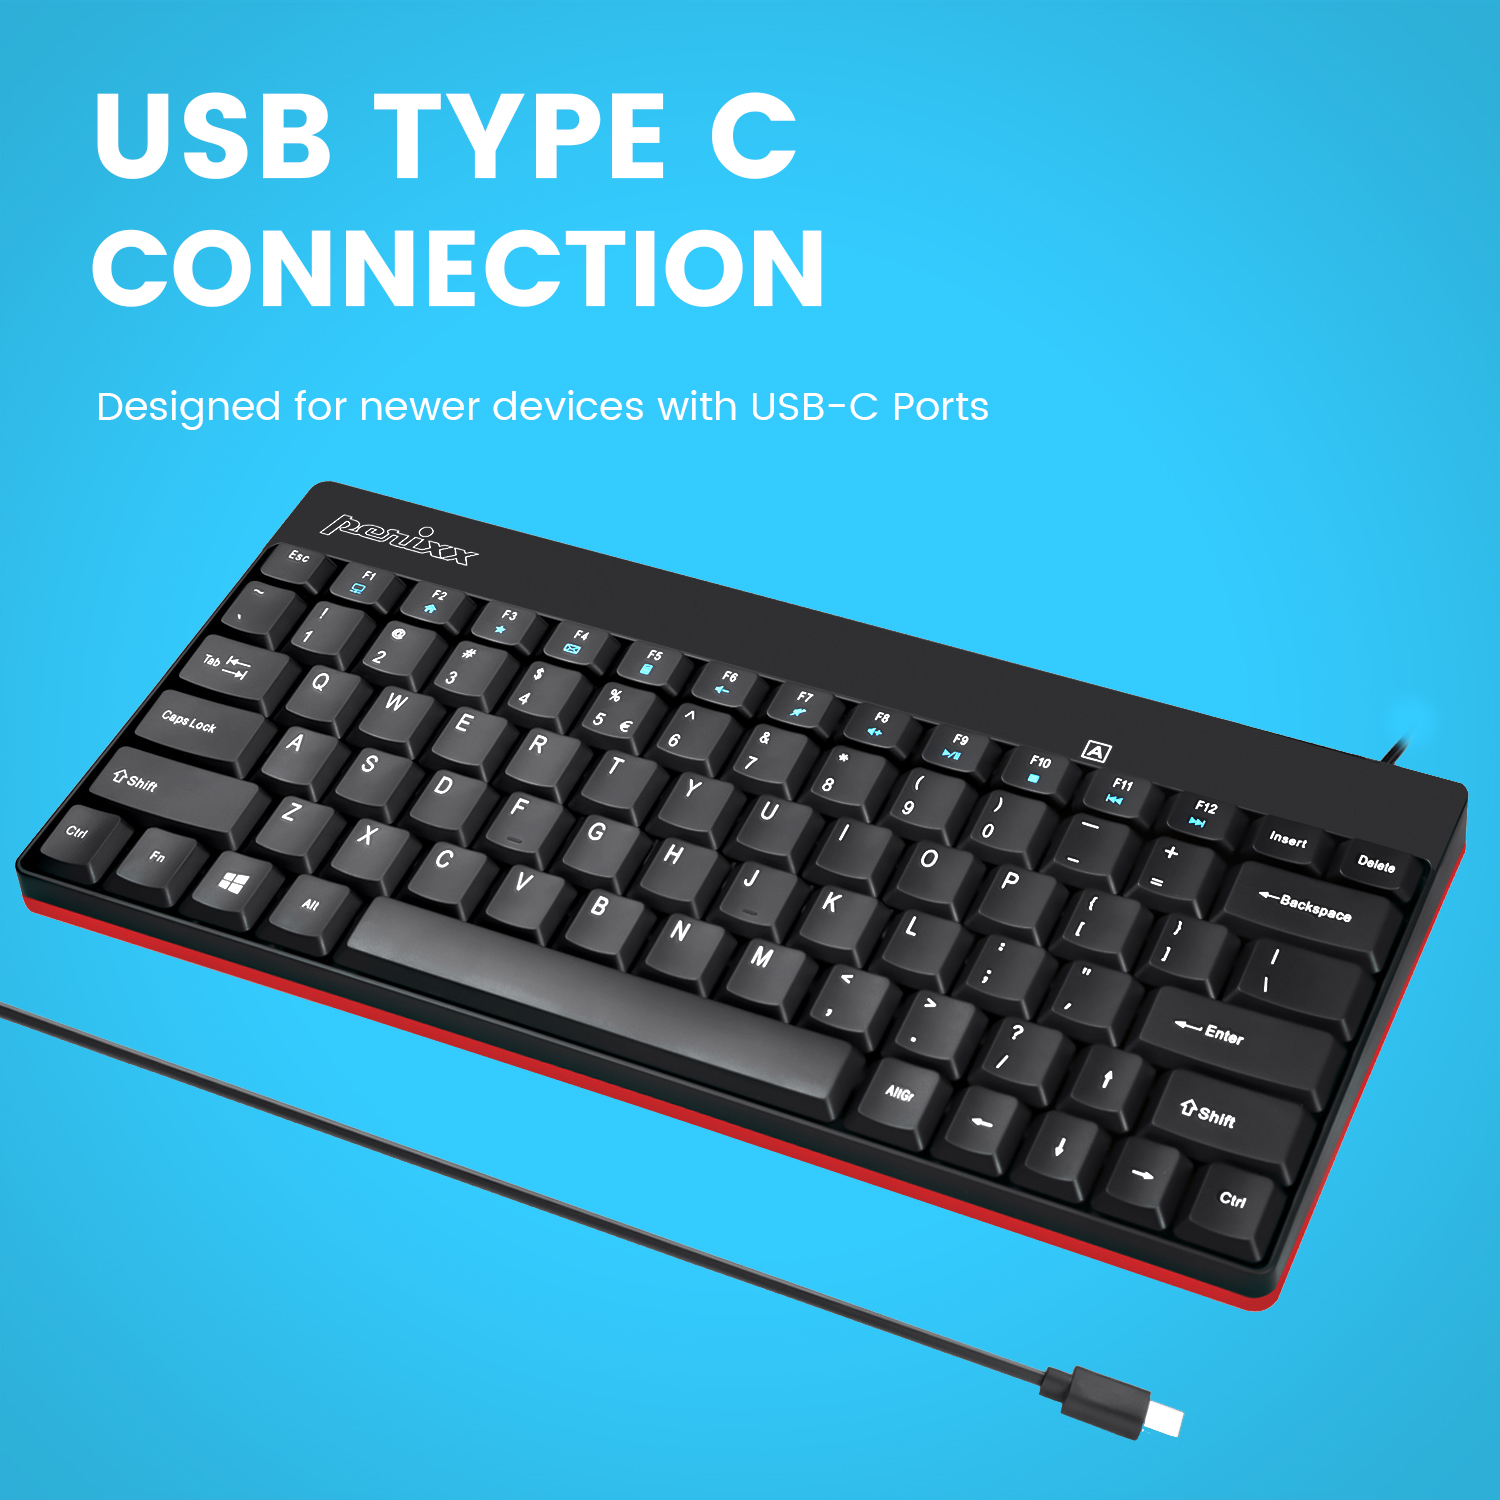 KEYBOARD DESIGNED FOR USB C DEVICES